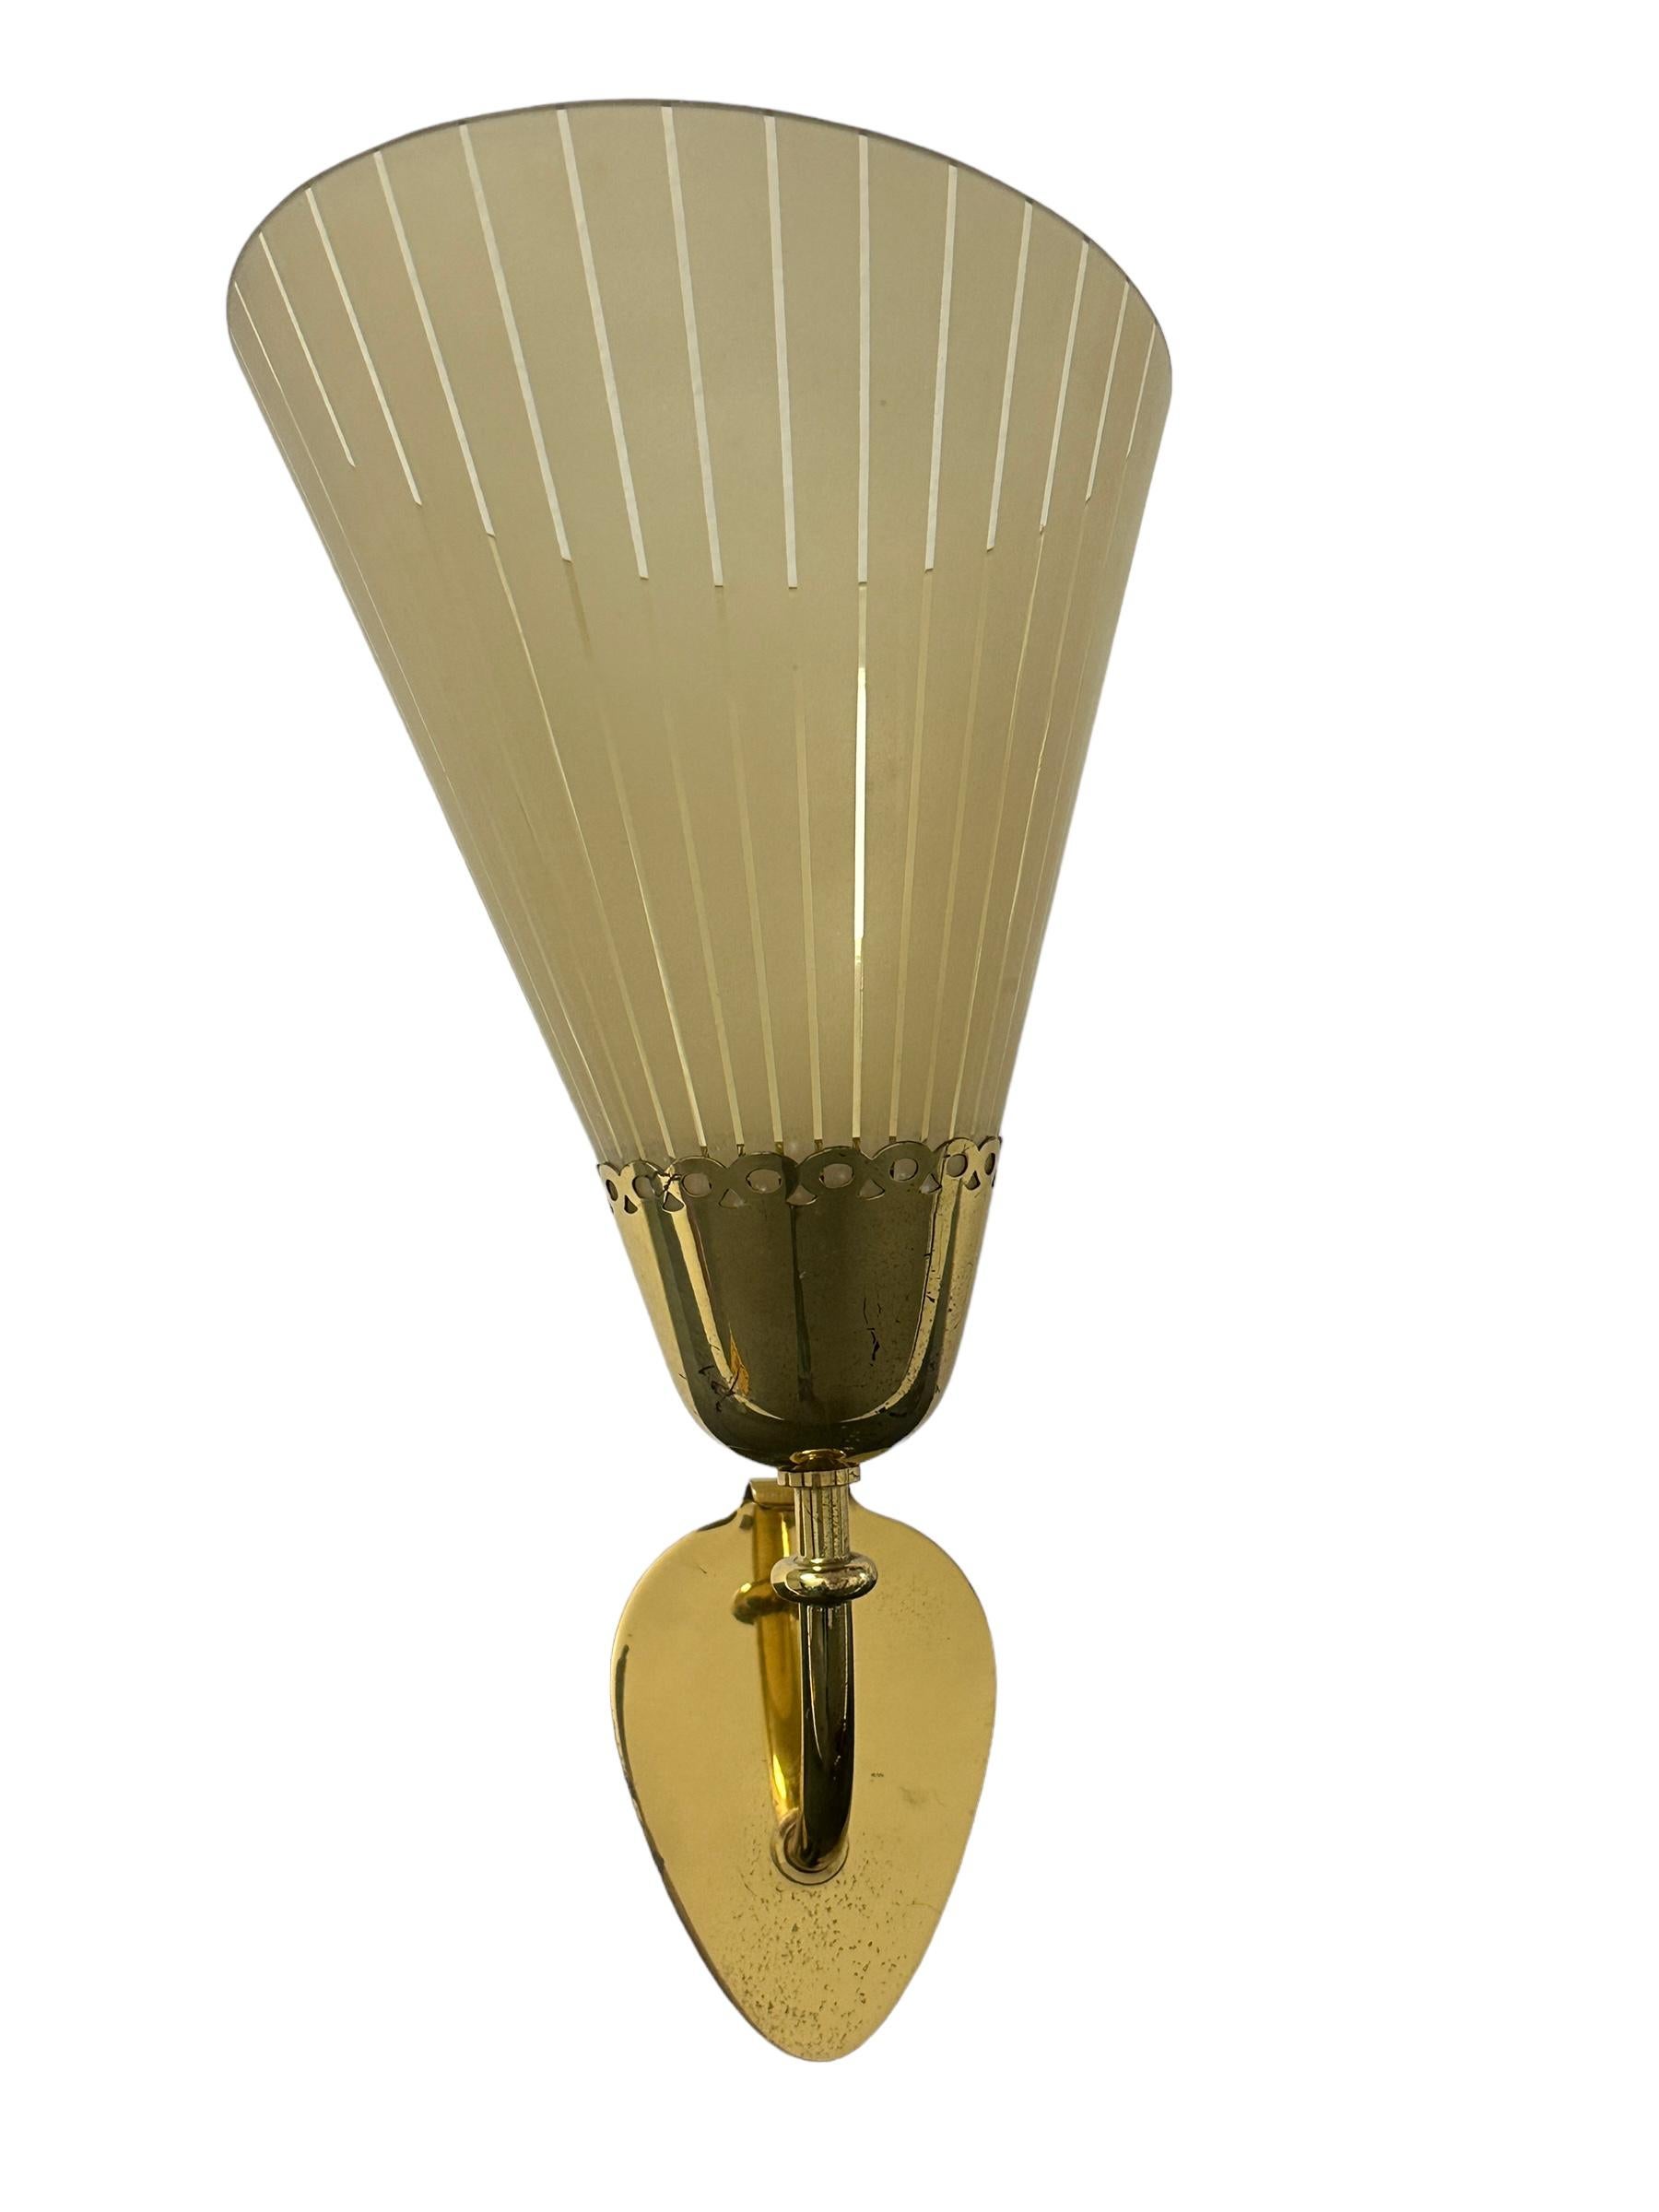 Very decorative and beautiful sconce, matching the chandelier we have also for offer. It is made of brass, fitted with a E27 Socket. Made in Germany in the 1950s, unattributed Manufacturer. The Fixture requires one European E27 / 110 Volt Edison